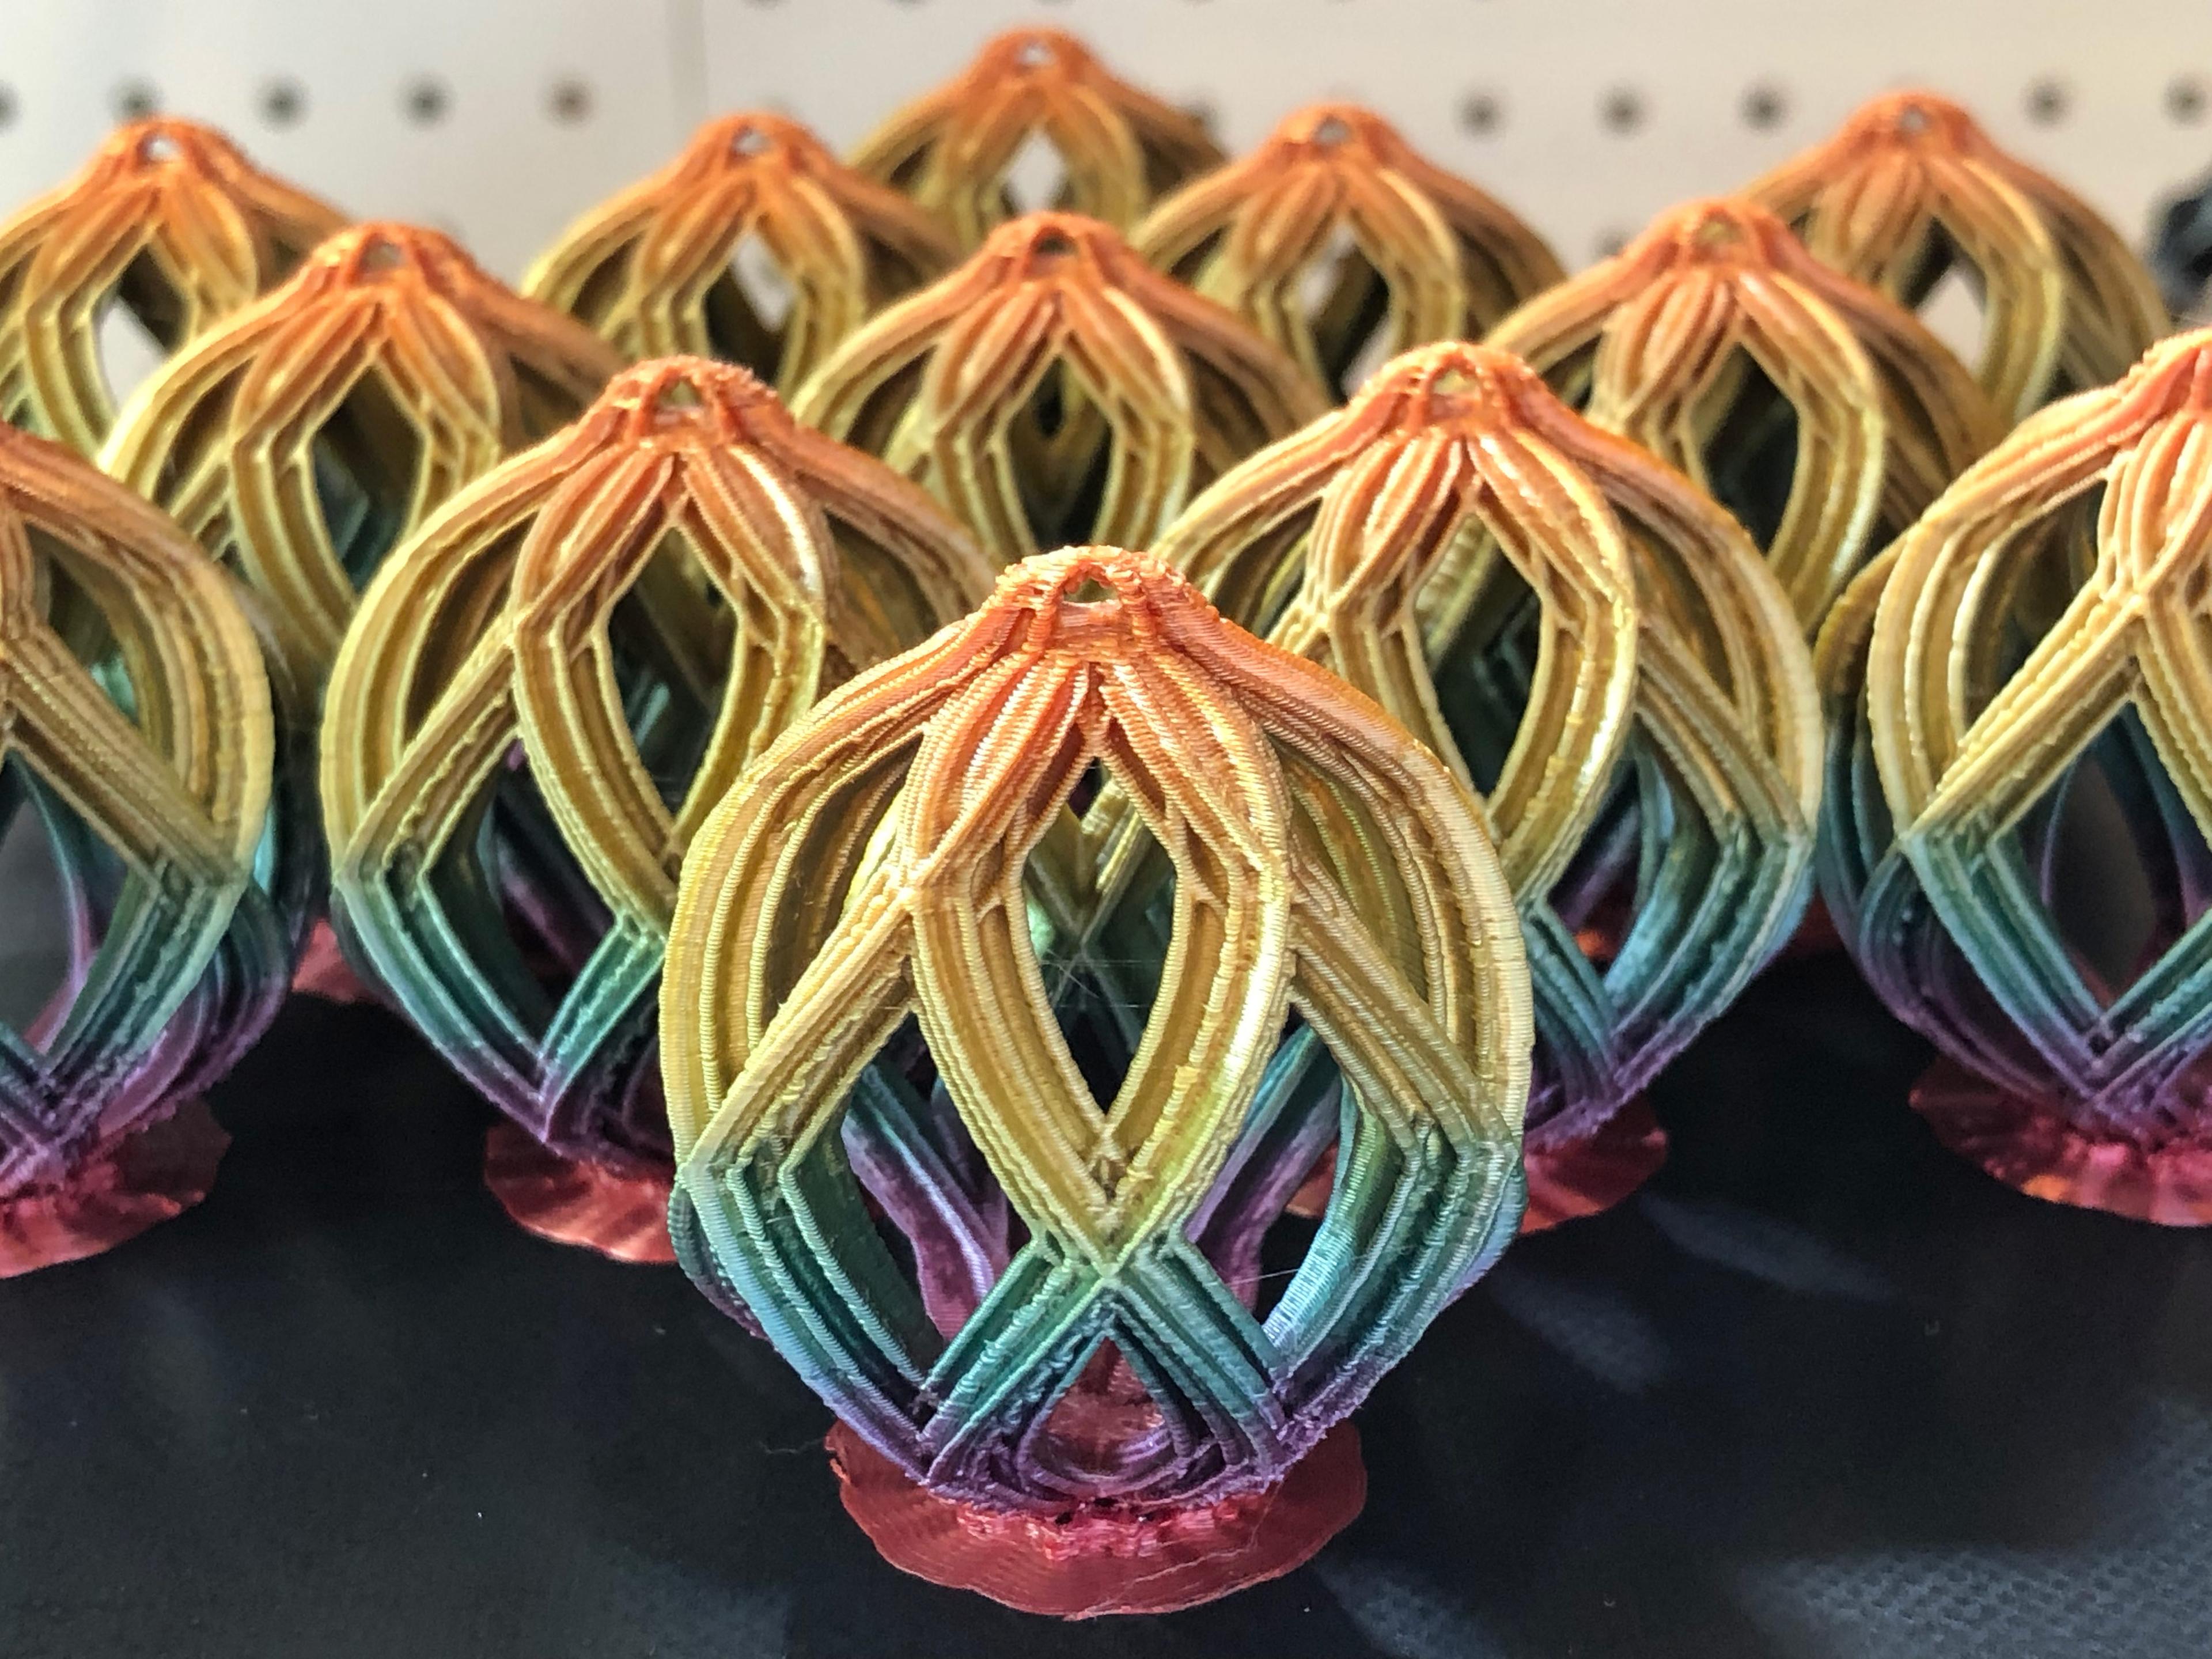 MINI Ornaments - This is version 3.2 of the Christmas Lattice Ball. I simplified the geometry in version 3.2 to make it easier to slice and print multiple at the same time. This allows you to have dramatic color changes using color change PLA (shown is the TTYT3D Quick Change PLA) and it also helps with the model overheating - especially at the very top. This group of 13 ornaments printed in about 17 hours. - 3d model